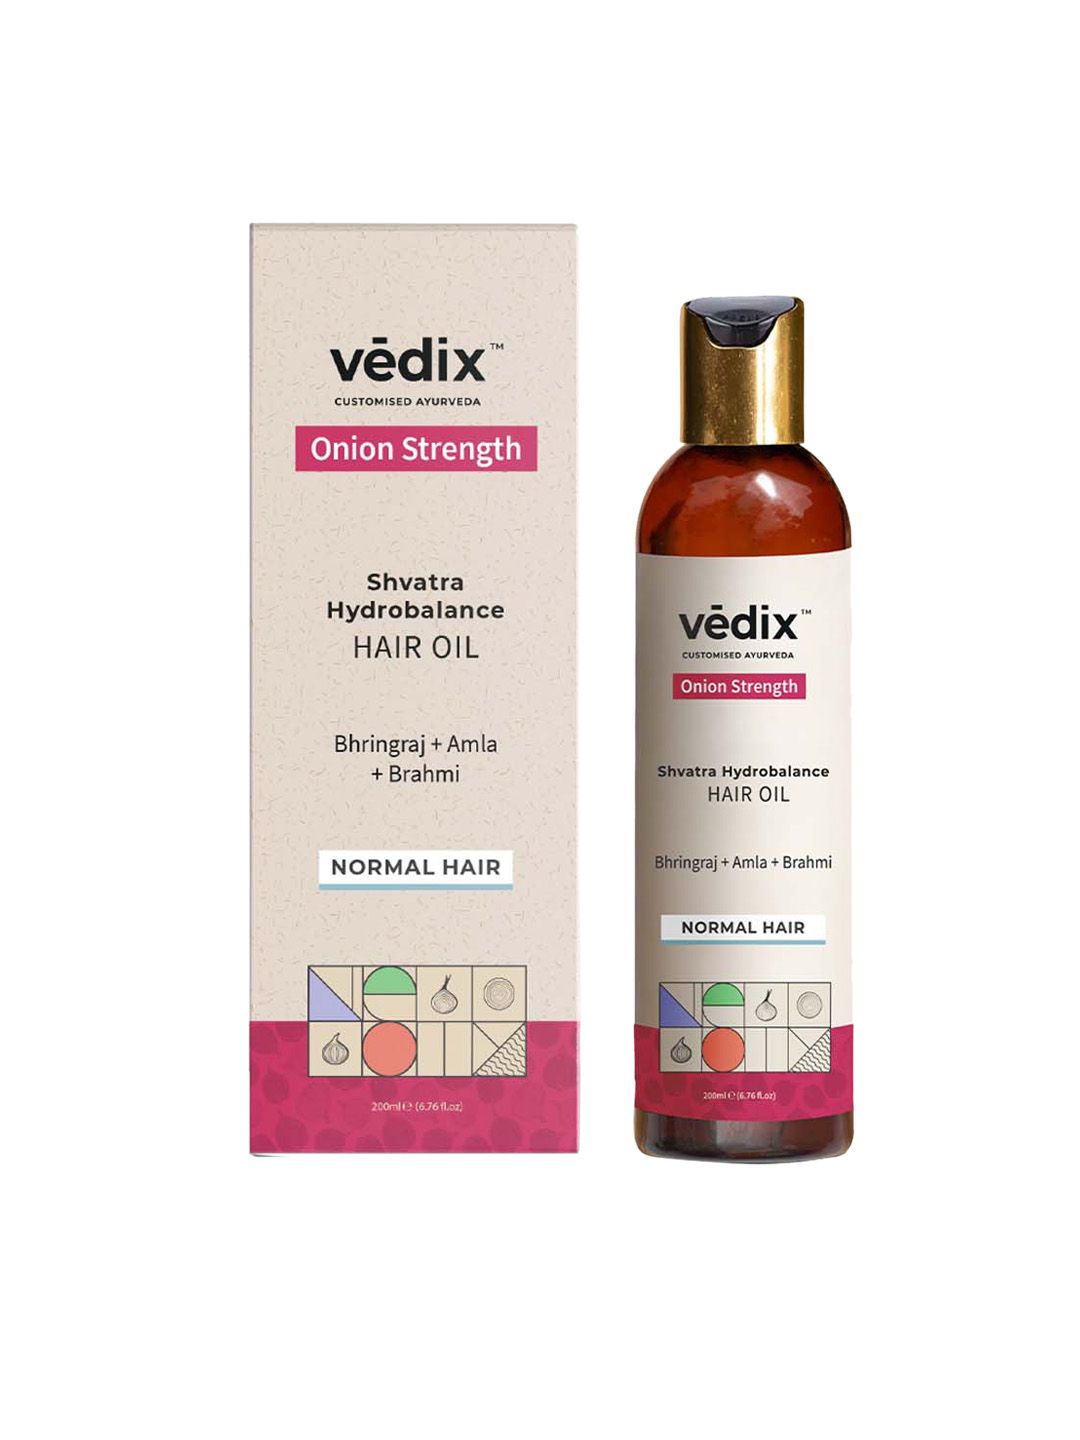 VEDIX Customized Ayurvedic Shvatra Hydrobalance Onion Hair Oil For Normal Hair 200 Ml Price in India